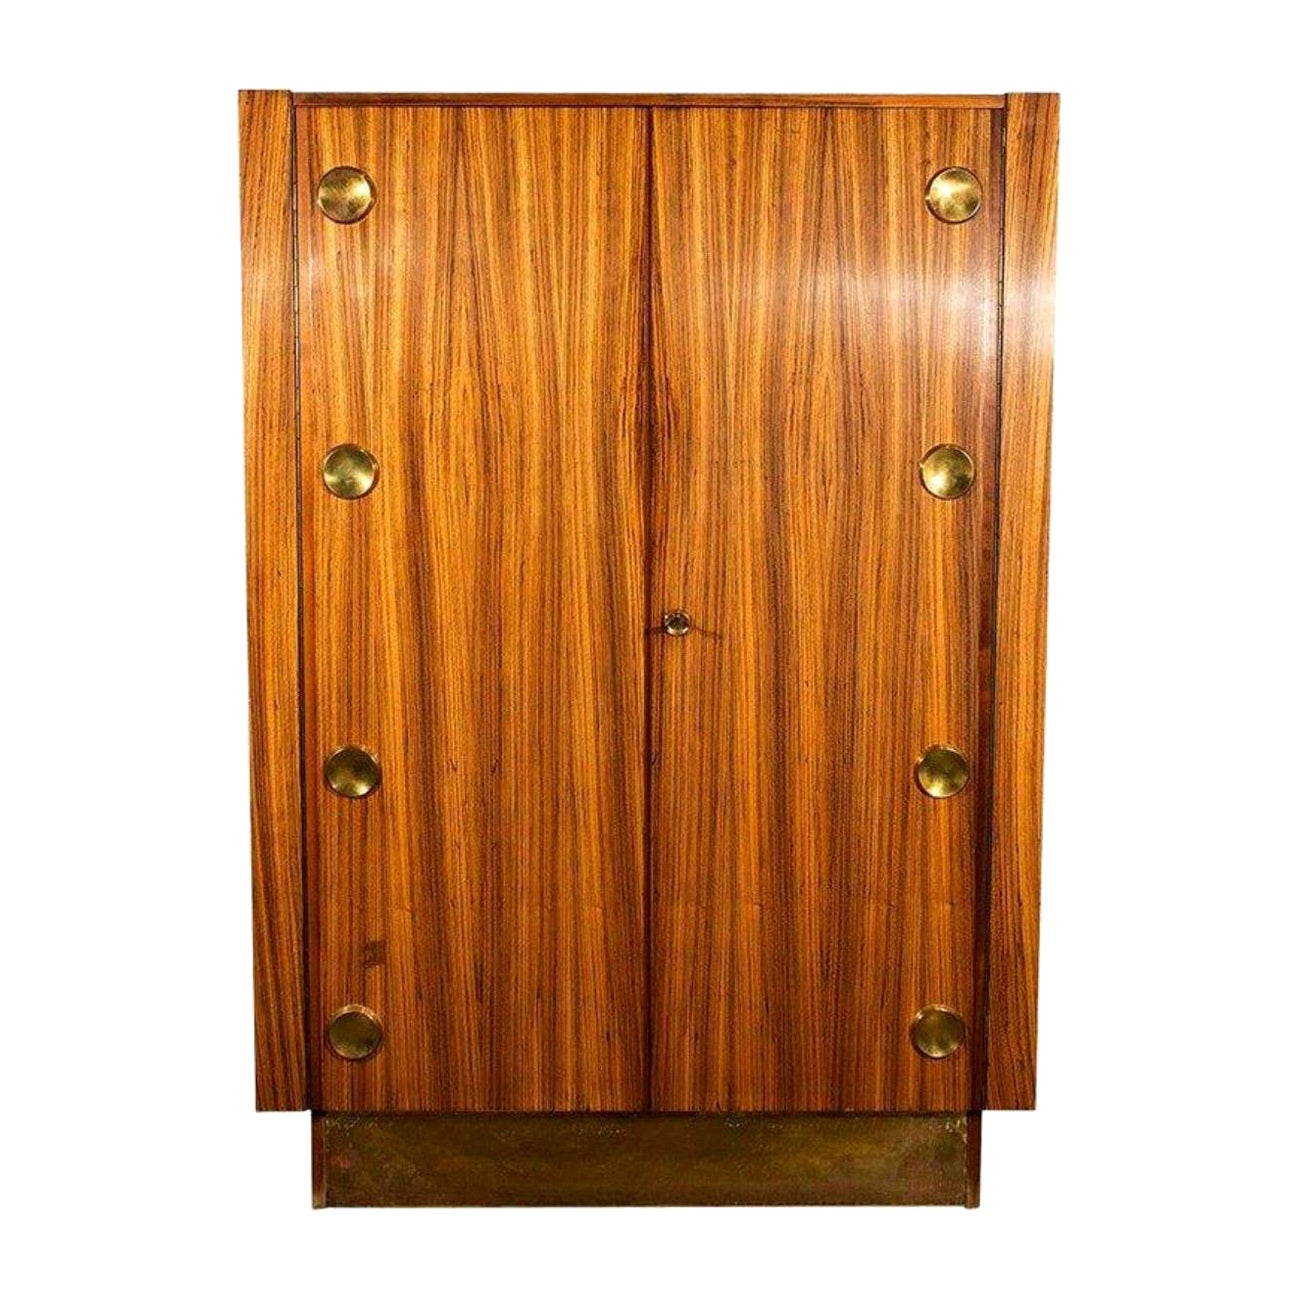 Cabinet or Wardrobe, Teak and Polished Brass Details, Art Deco Style, 1960ies For Sale